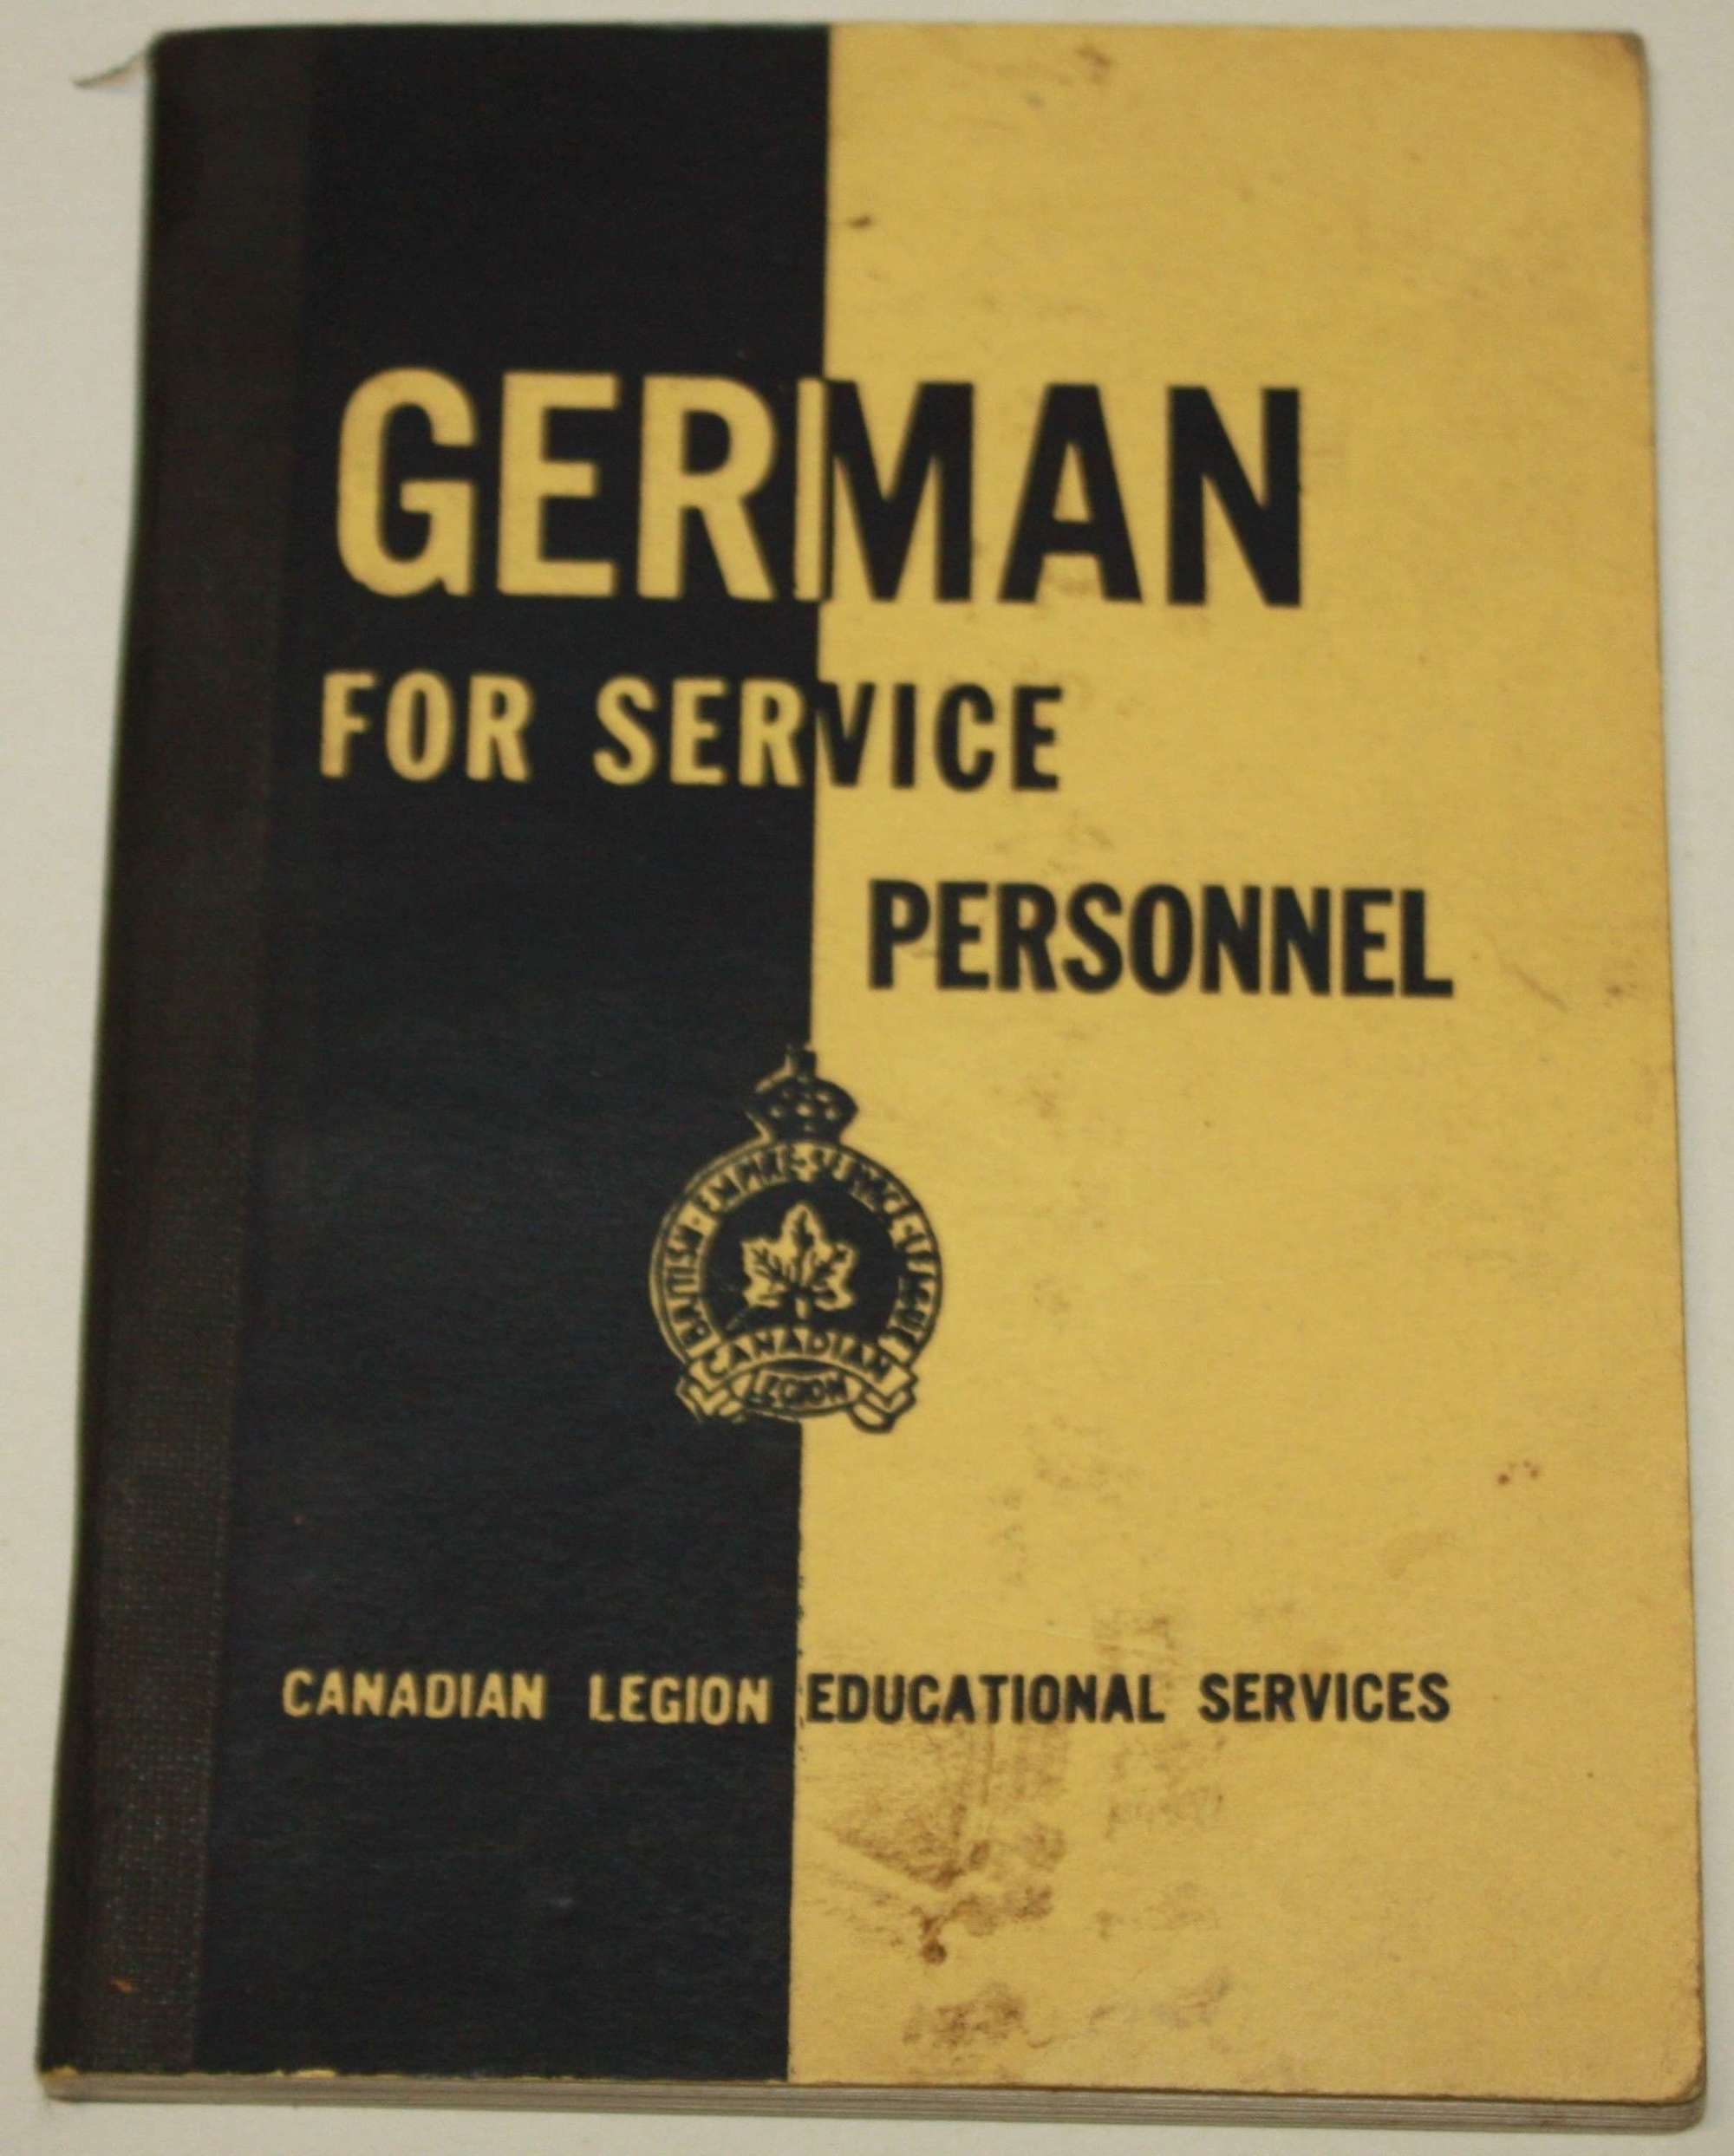 A WWII 1943 SCARCE CANADIAN GERMAN FOR SERVICE PERSONNEL